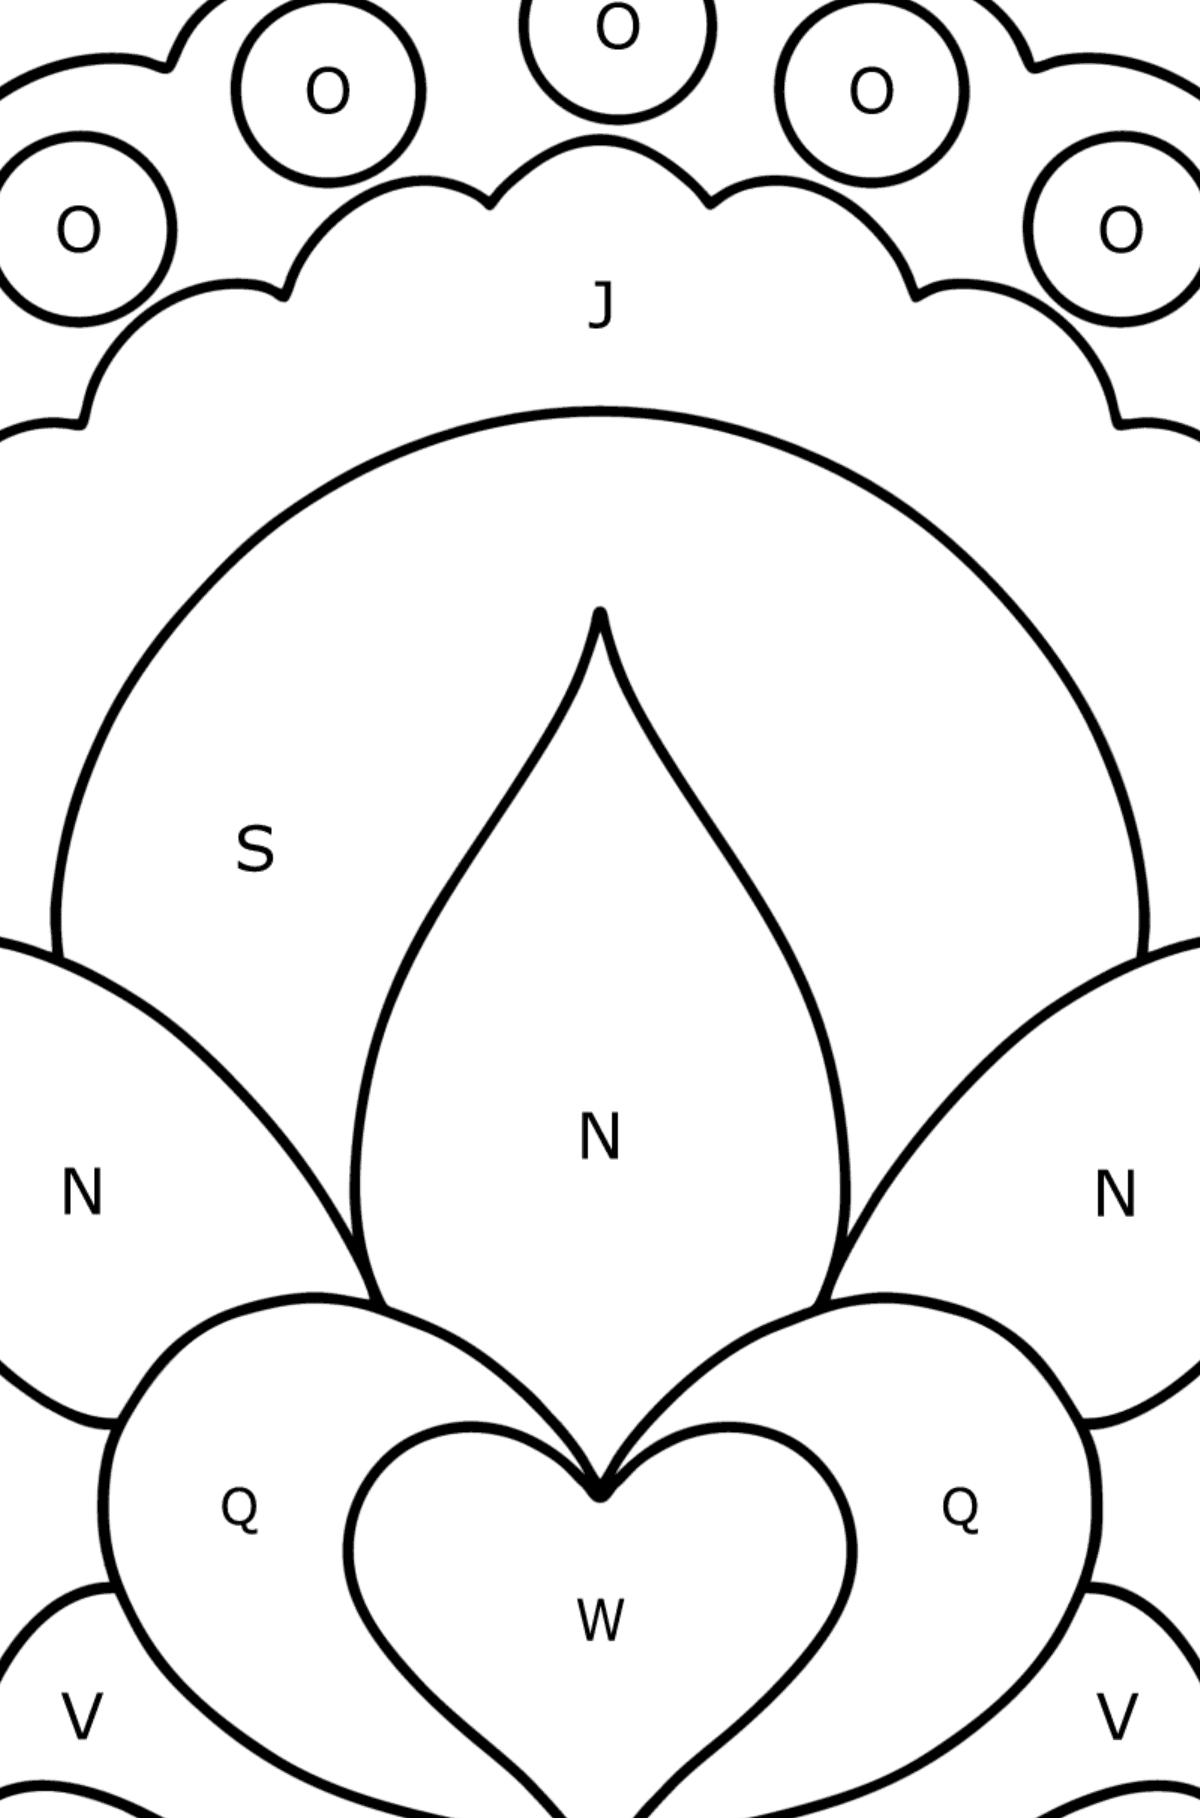 Simple coloring page - Flower Anti stress - Coloring by Letters for Kids